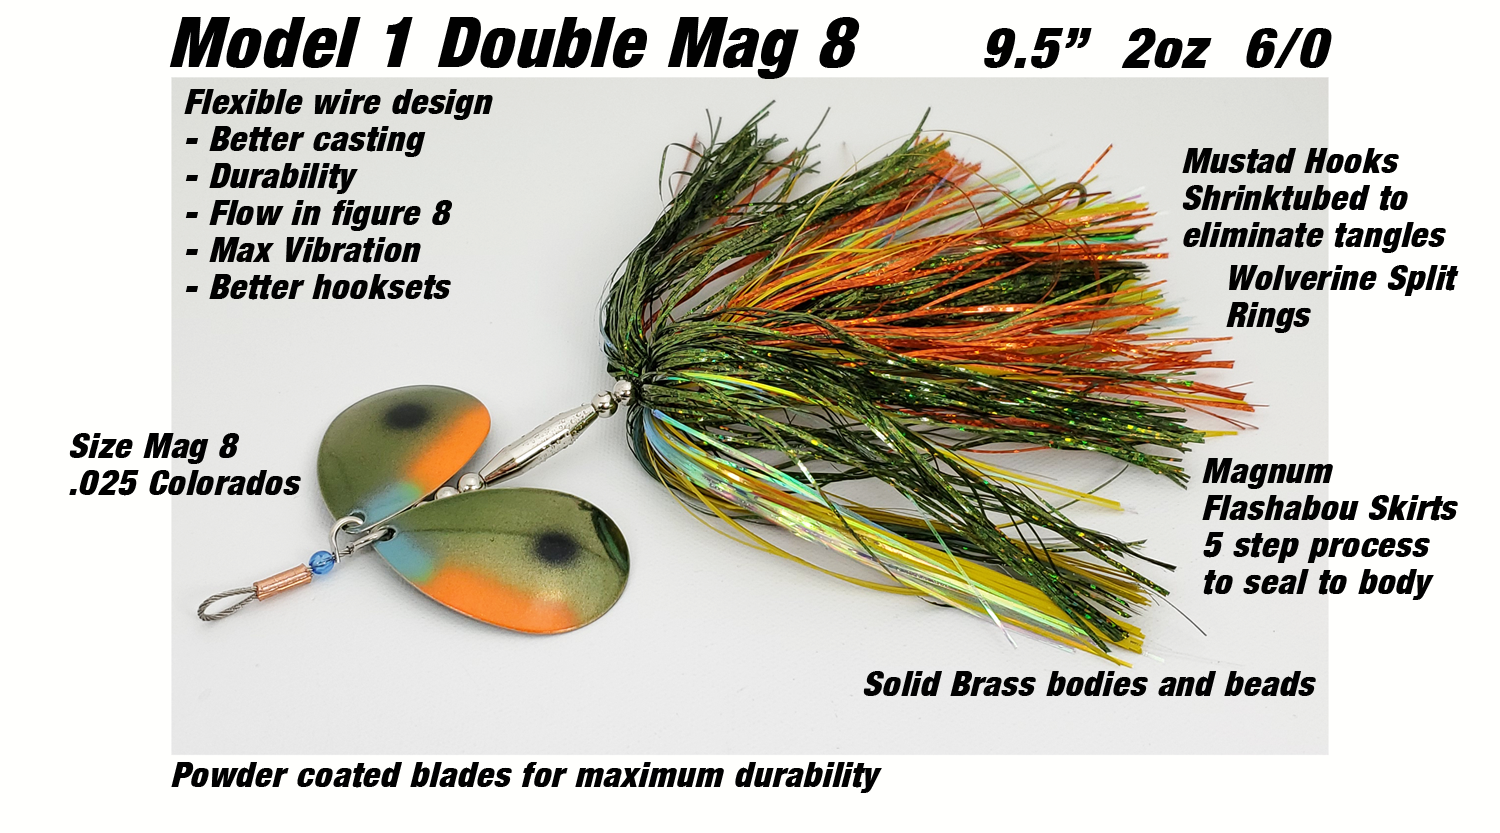 Musky Bucktail (Black Gold/Smooth) Muskie Pike Double 10 Inline Spinner  Musky Lures Baits Tackle